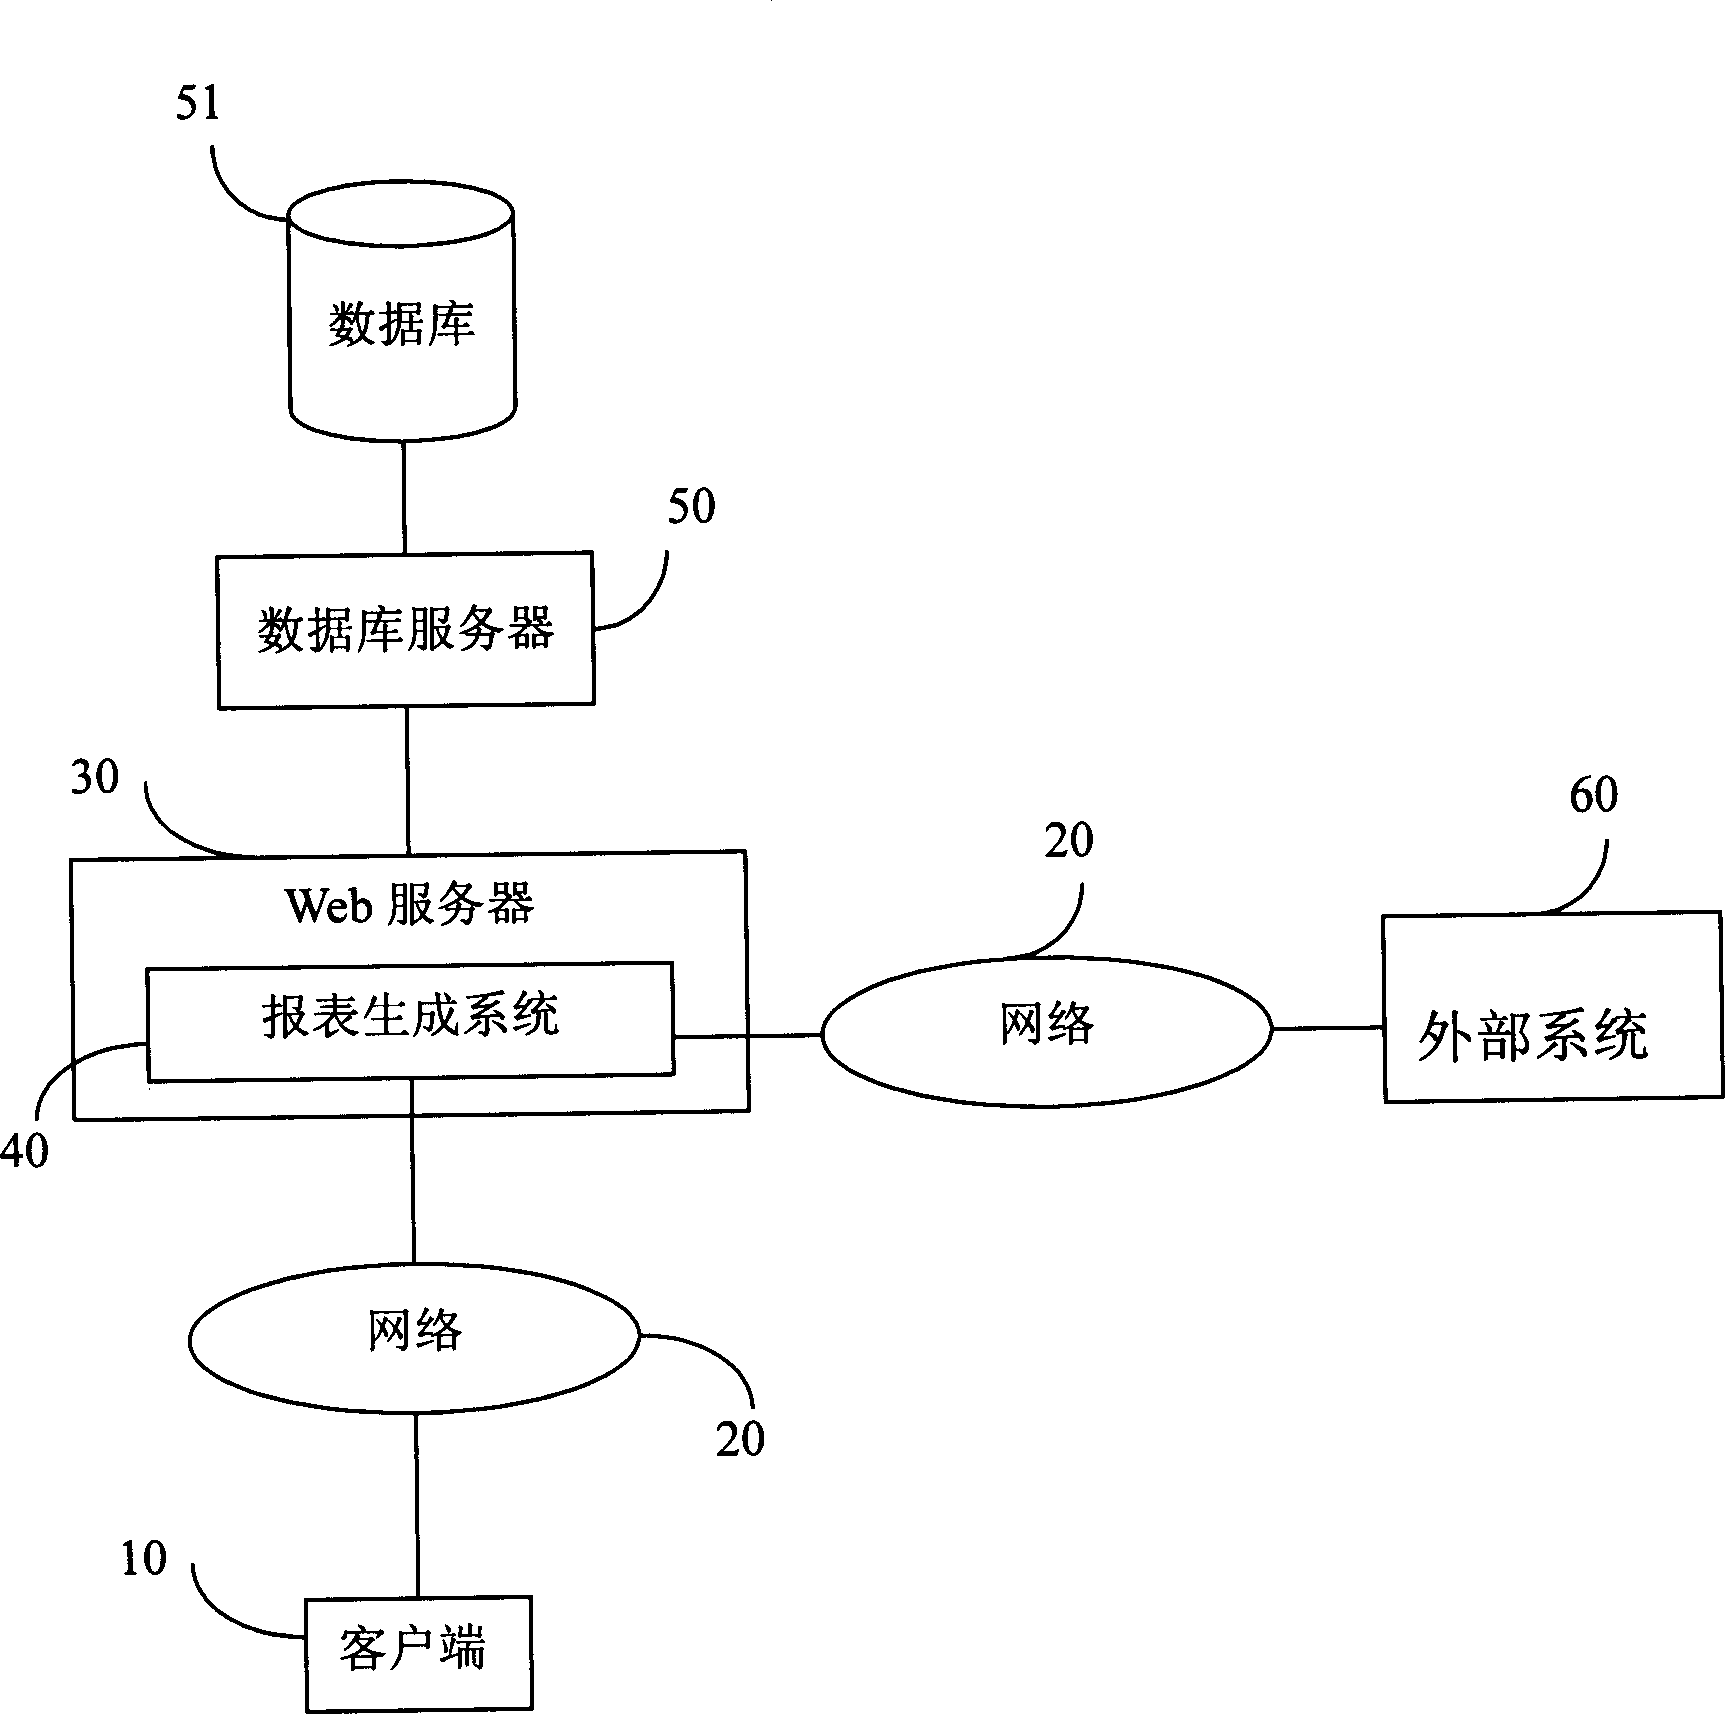 Report generating system and method